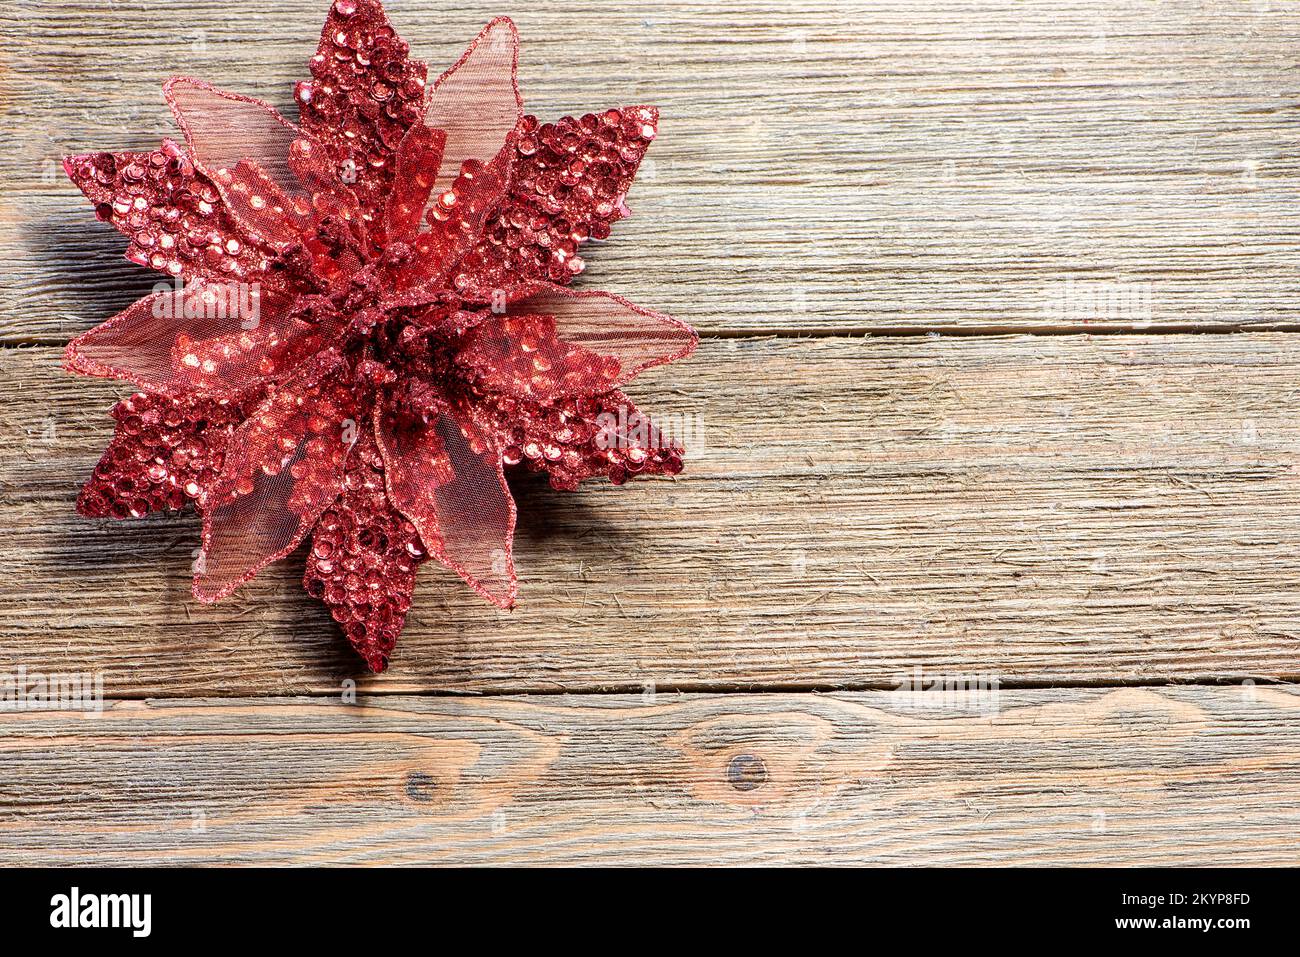 Red Christmas Poinsettia ornament on a wooden background, farmhouse style, no text Stock Photo